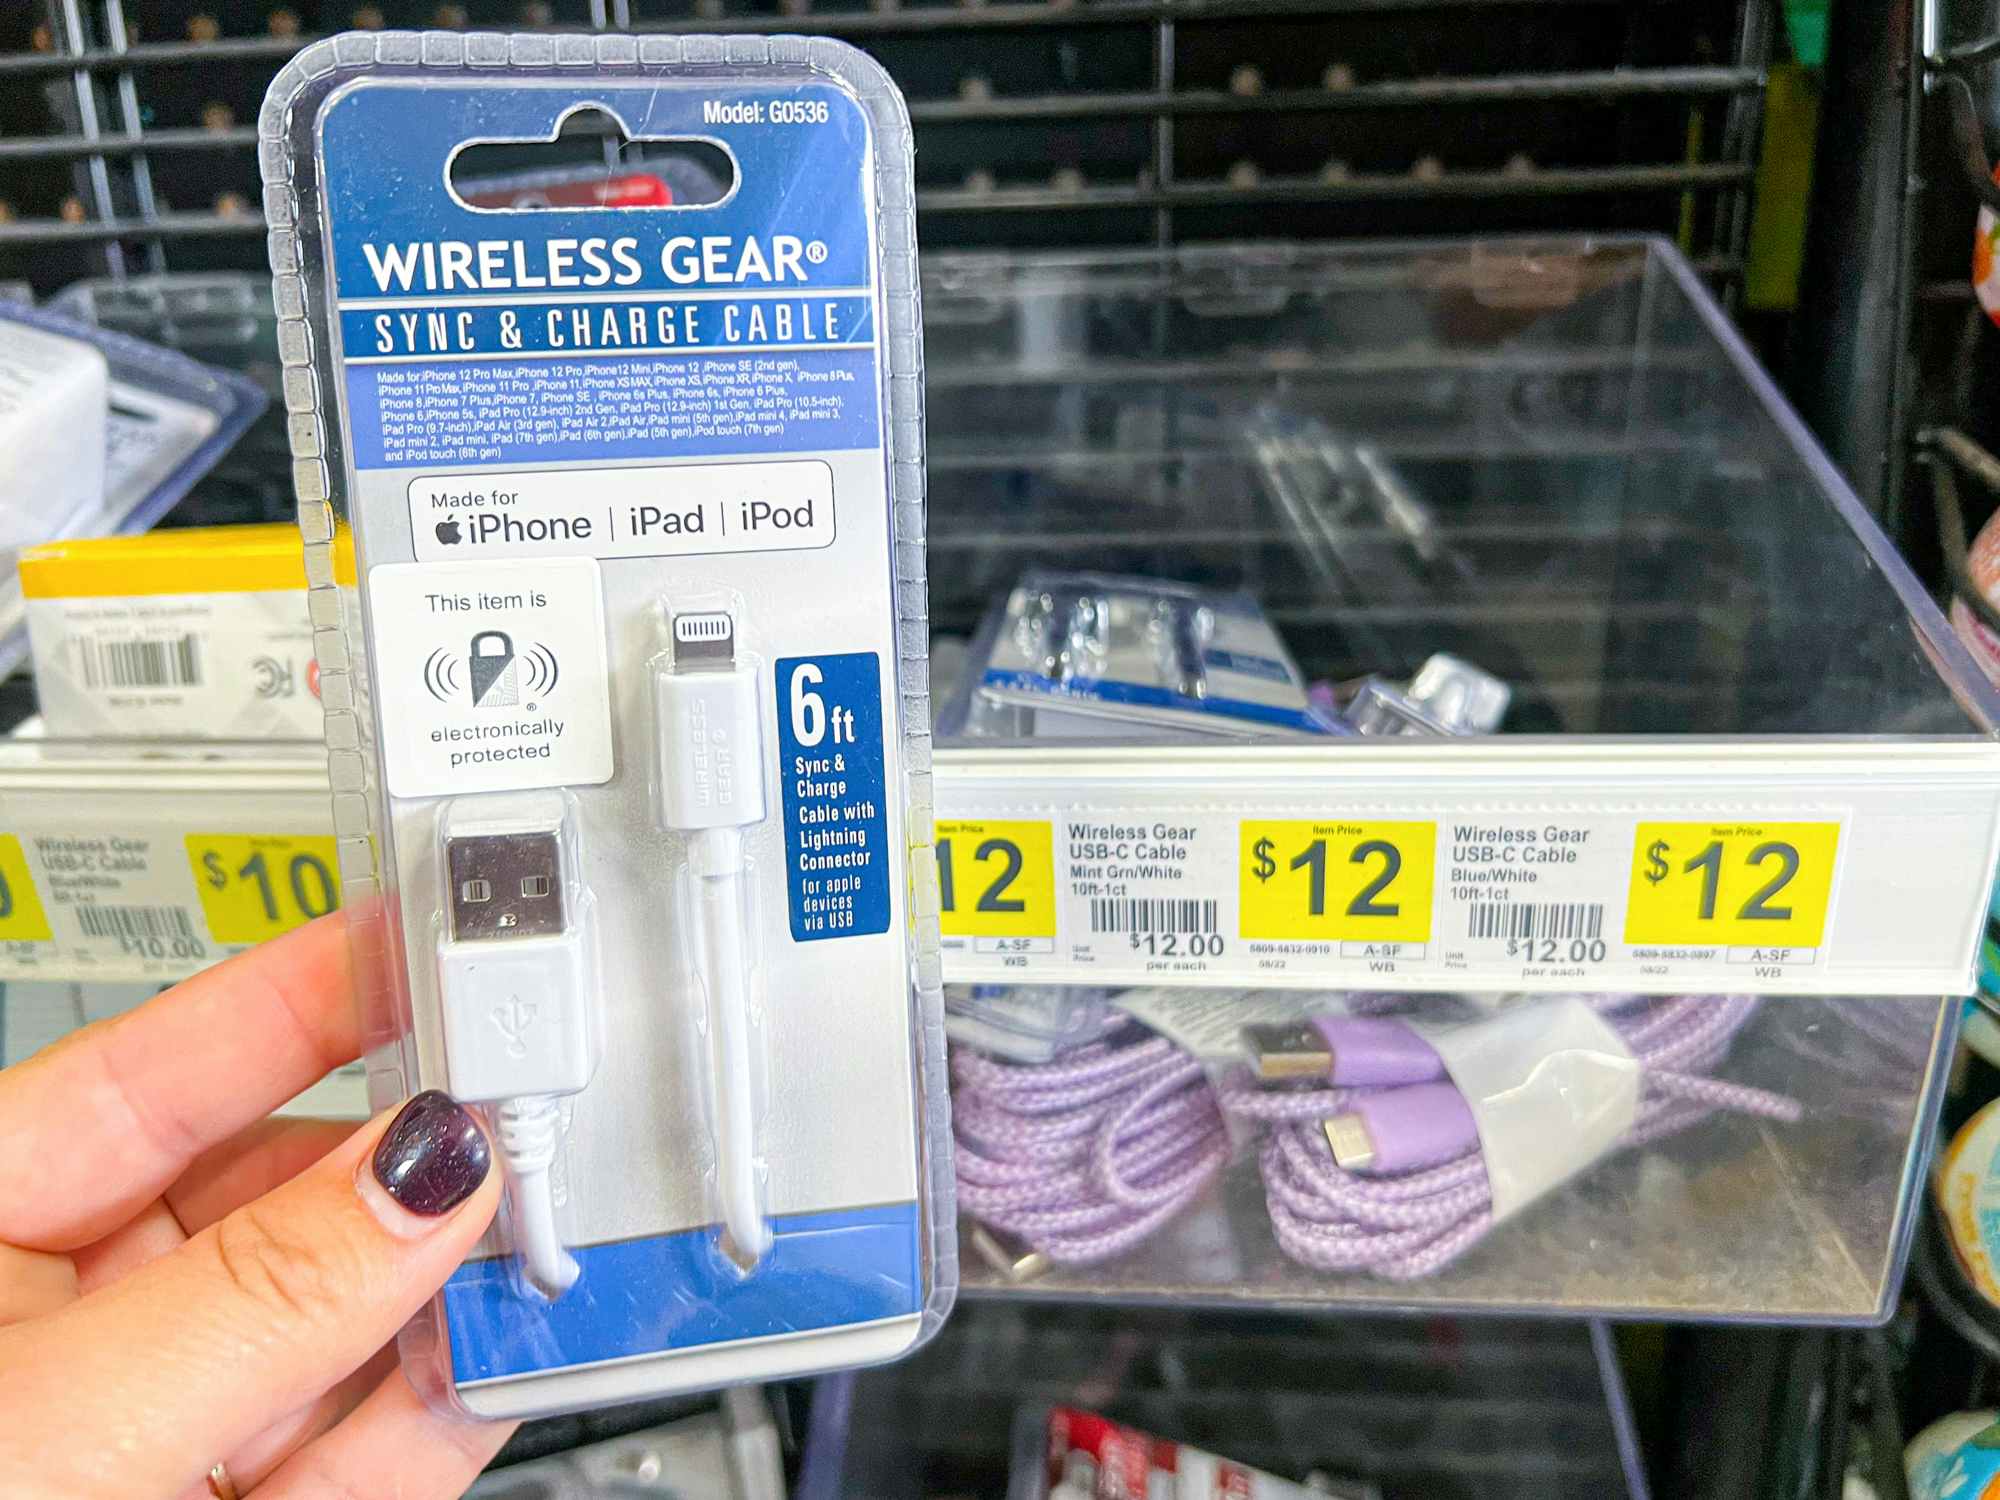 Someone holding up a Wireless Gear iPhone charger next to a shelf at Dollar General